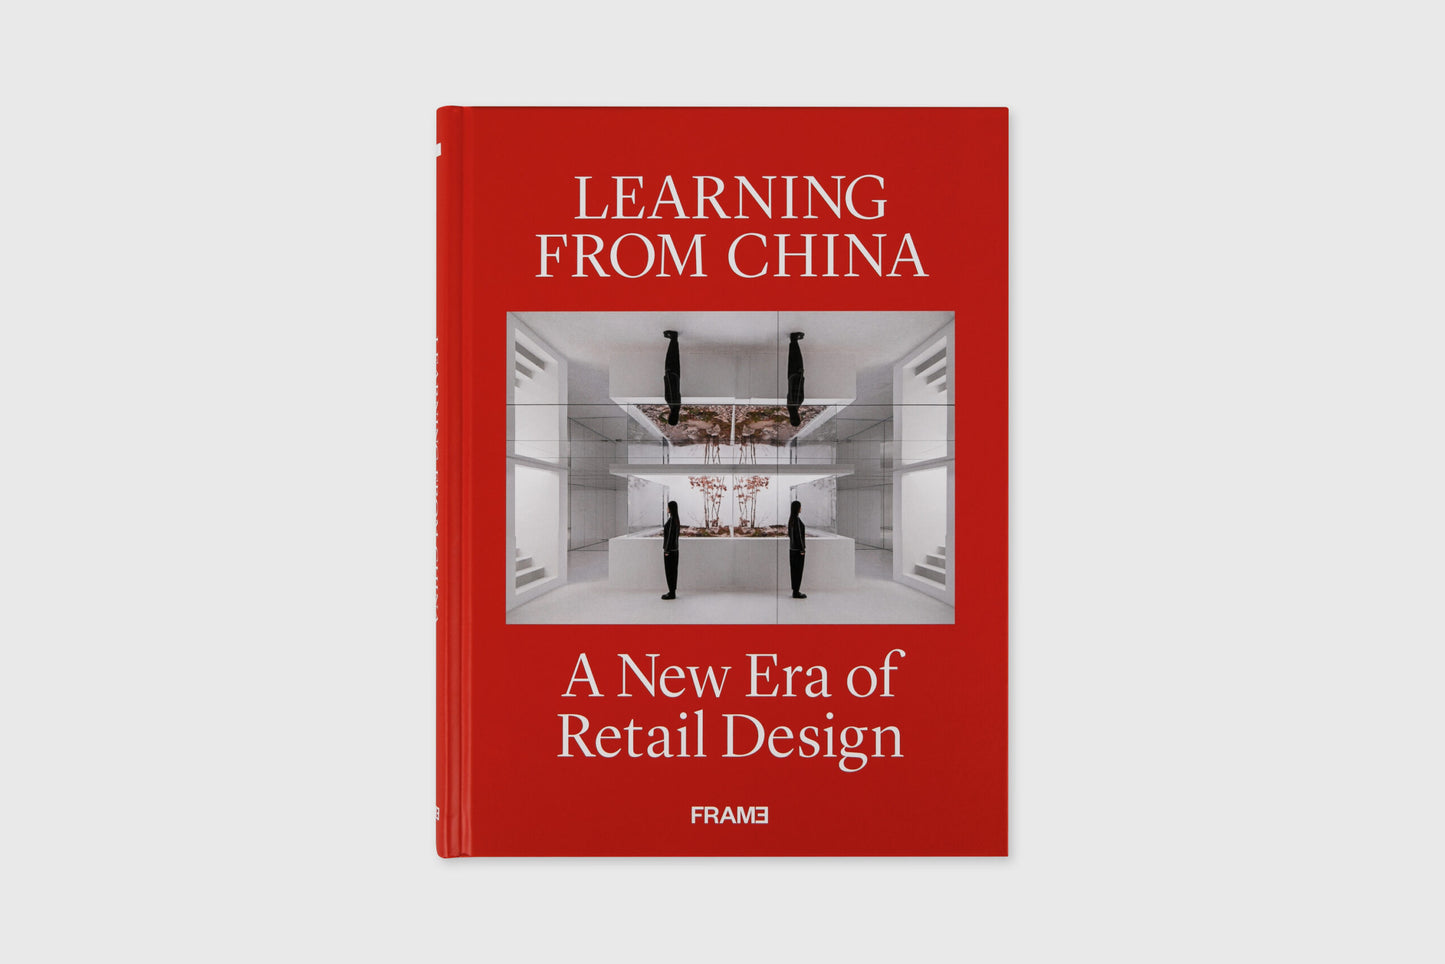 Learning from China: A New Era of Retail Design